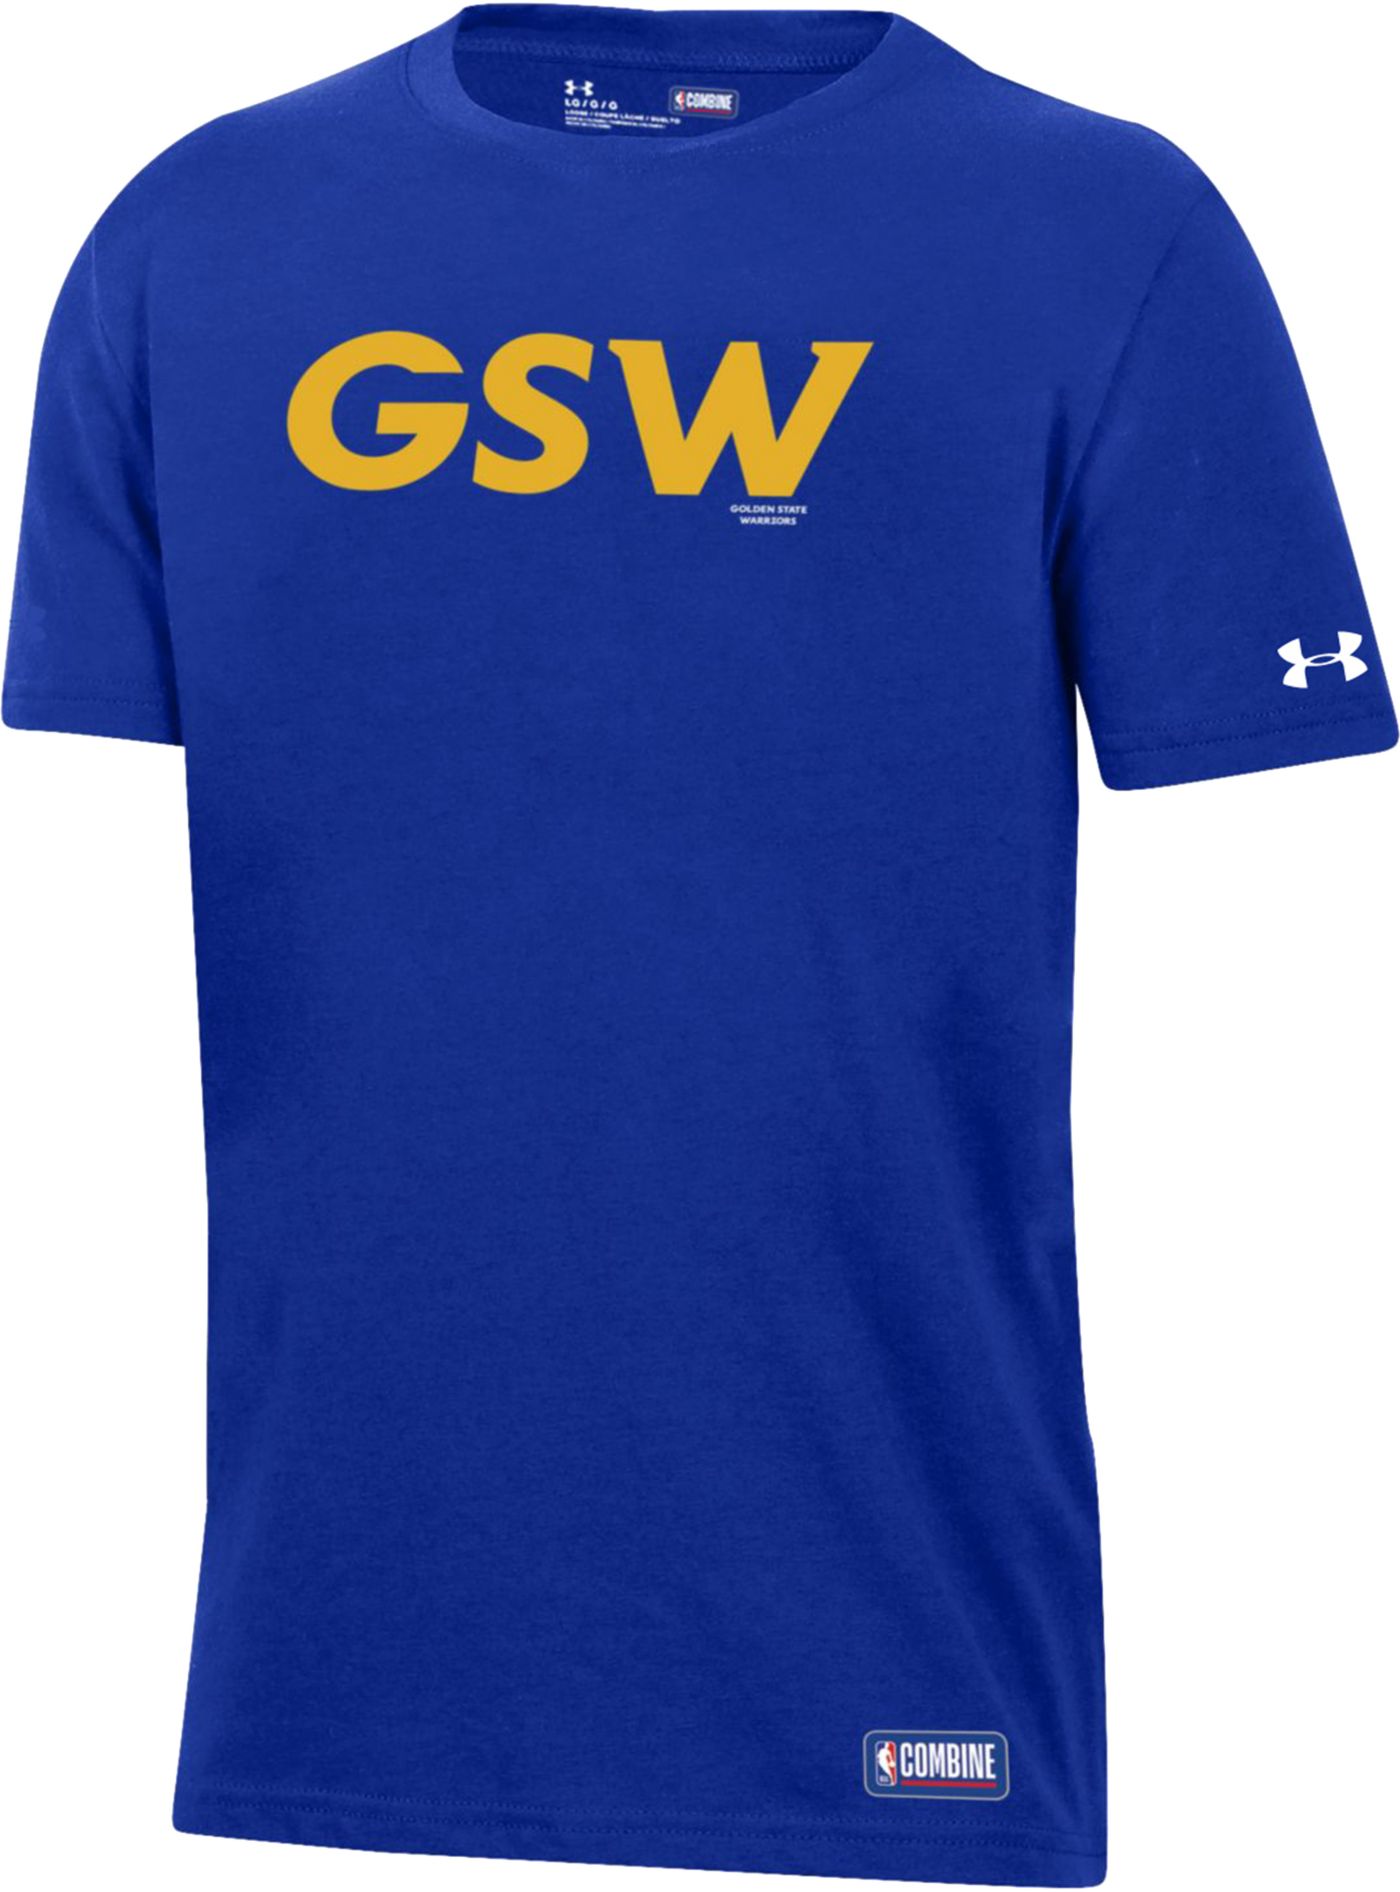 Under Armour Youth Golden State Warriors Performance T-Shirt | DICK'S ...